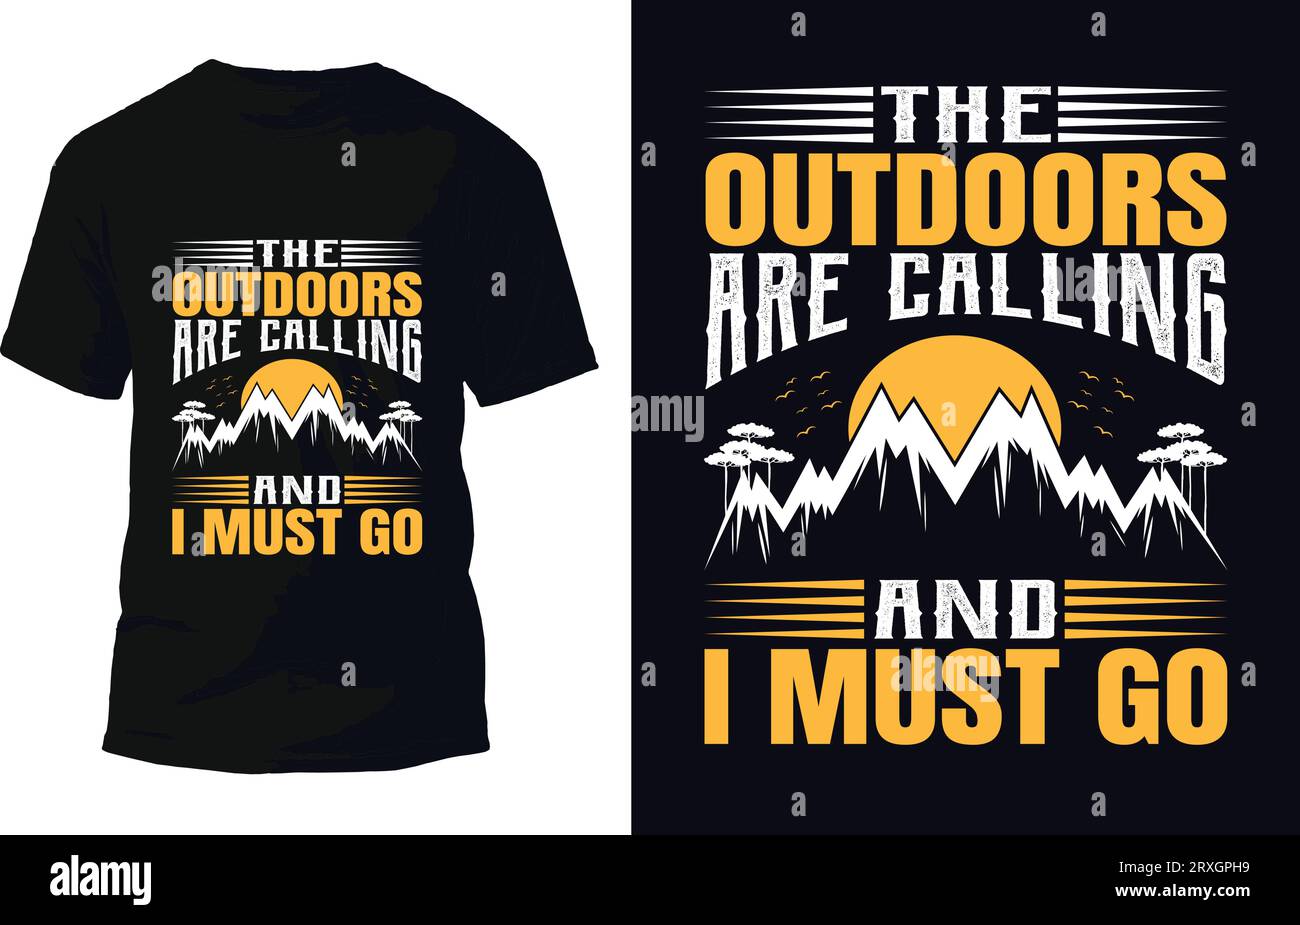 The Outdoors Are Calling And I Must go T Shirt Design Vector Stock Vector